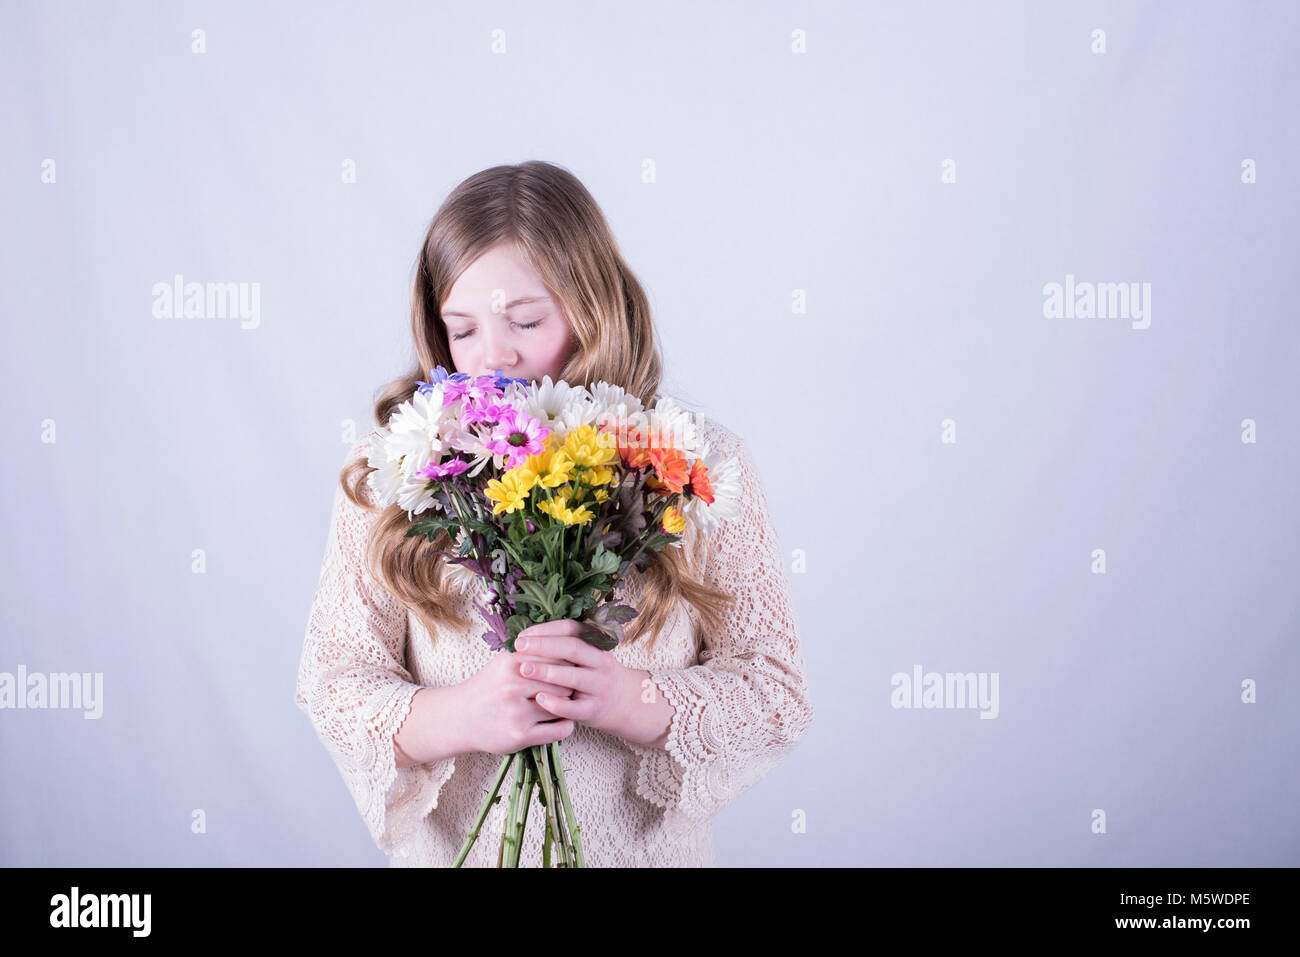 Twelve-year-old girl with long, dirty blonde hair holding colorful bouquet of daisies over lower face and smelling with eyes closed, white background Stock Photo